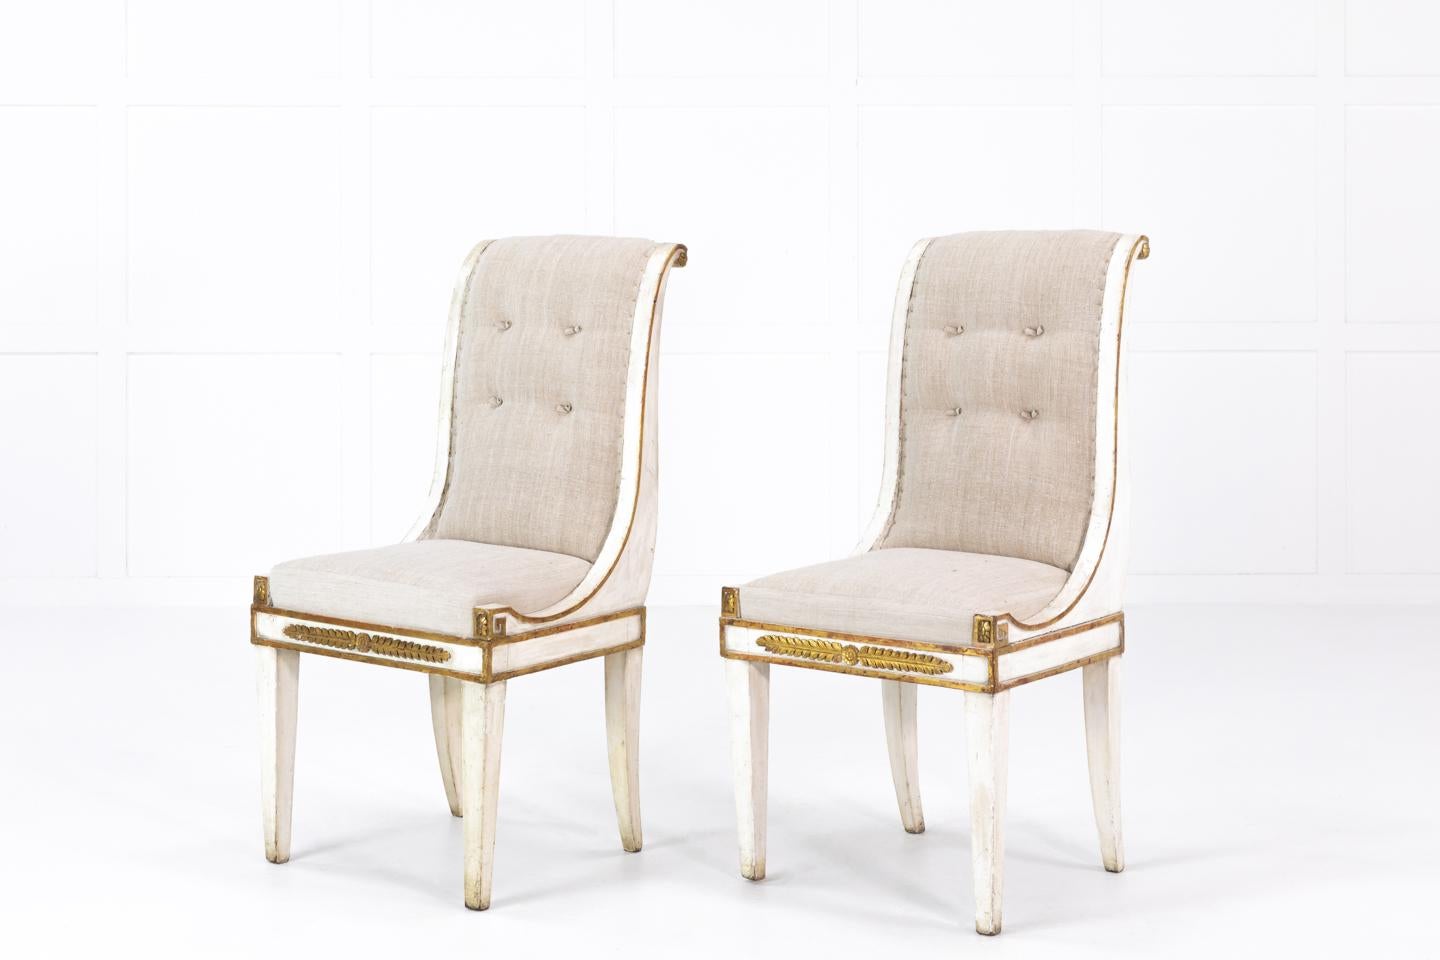 Pair of, stunning, early 19th century Italian side chairs with original gilt and paint. Wonderful design and shape. Upholstered by us in an antique linen.